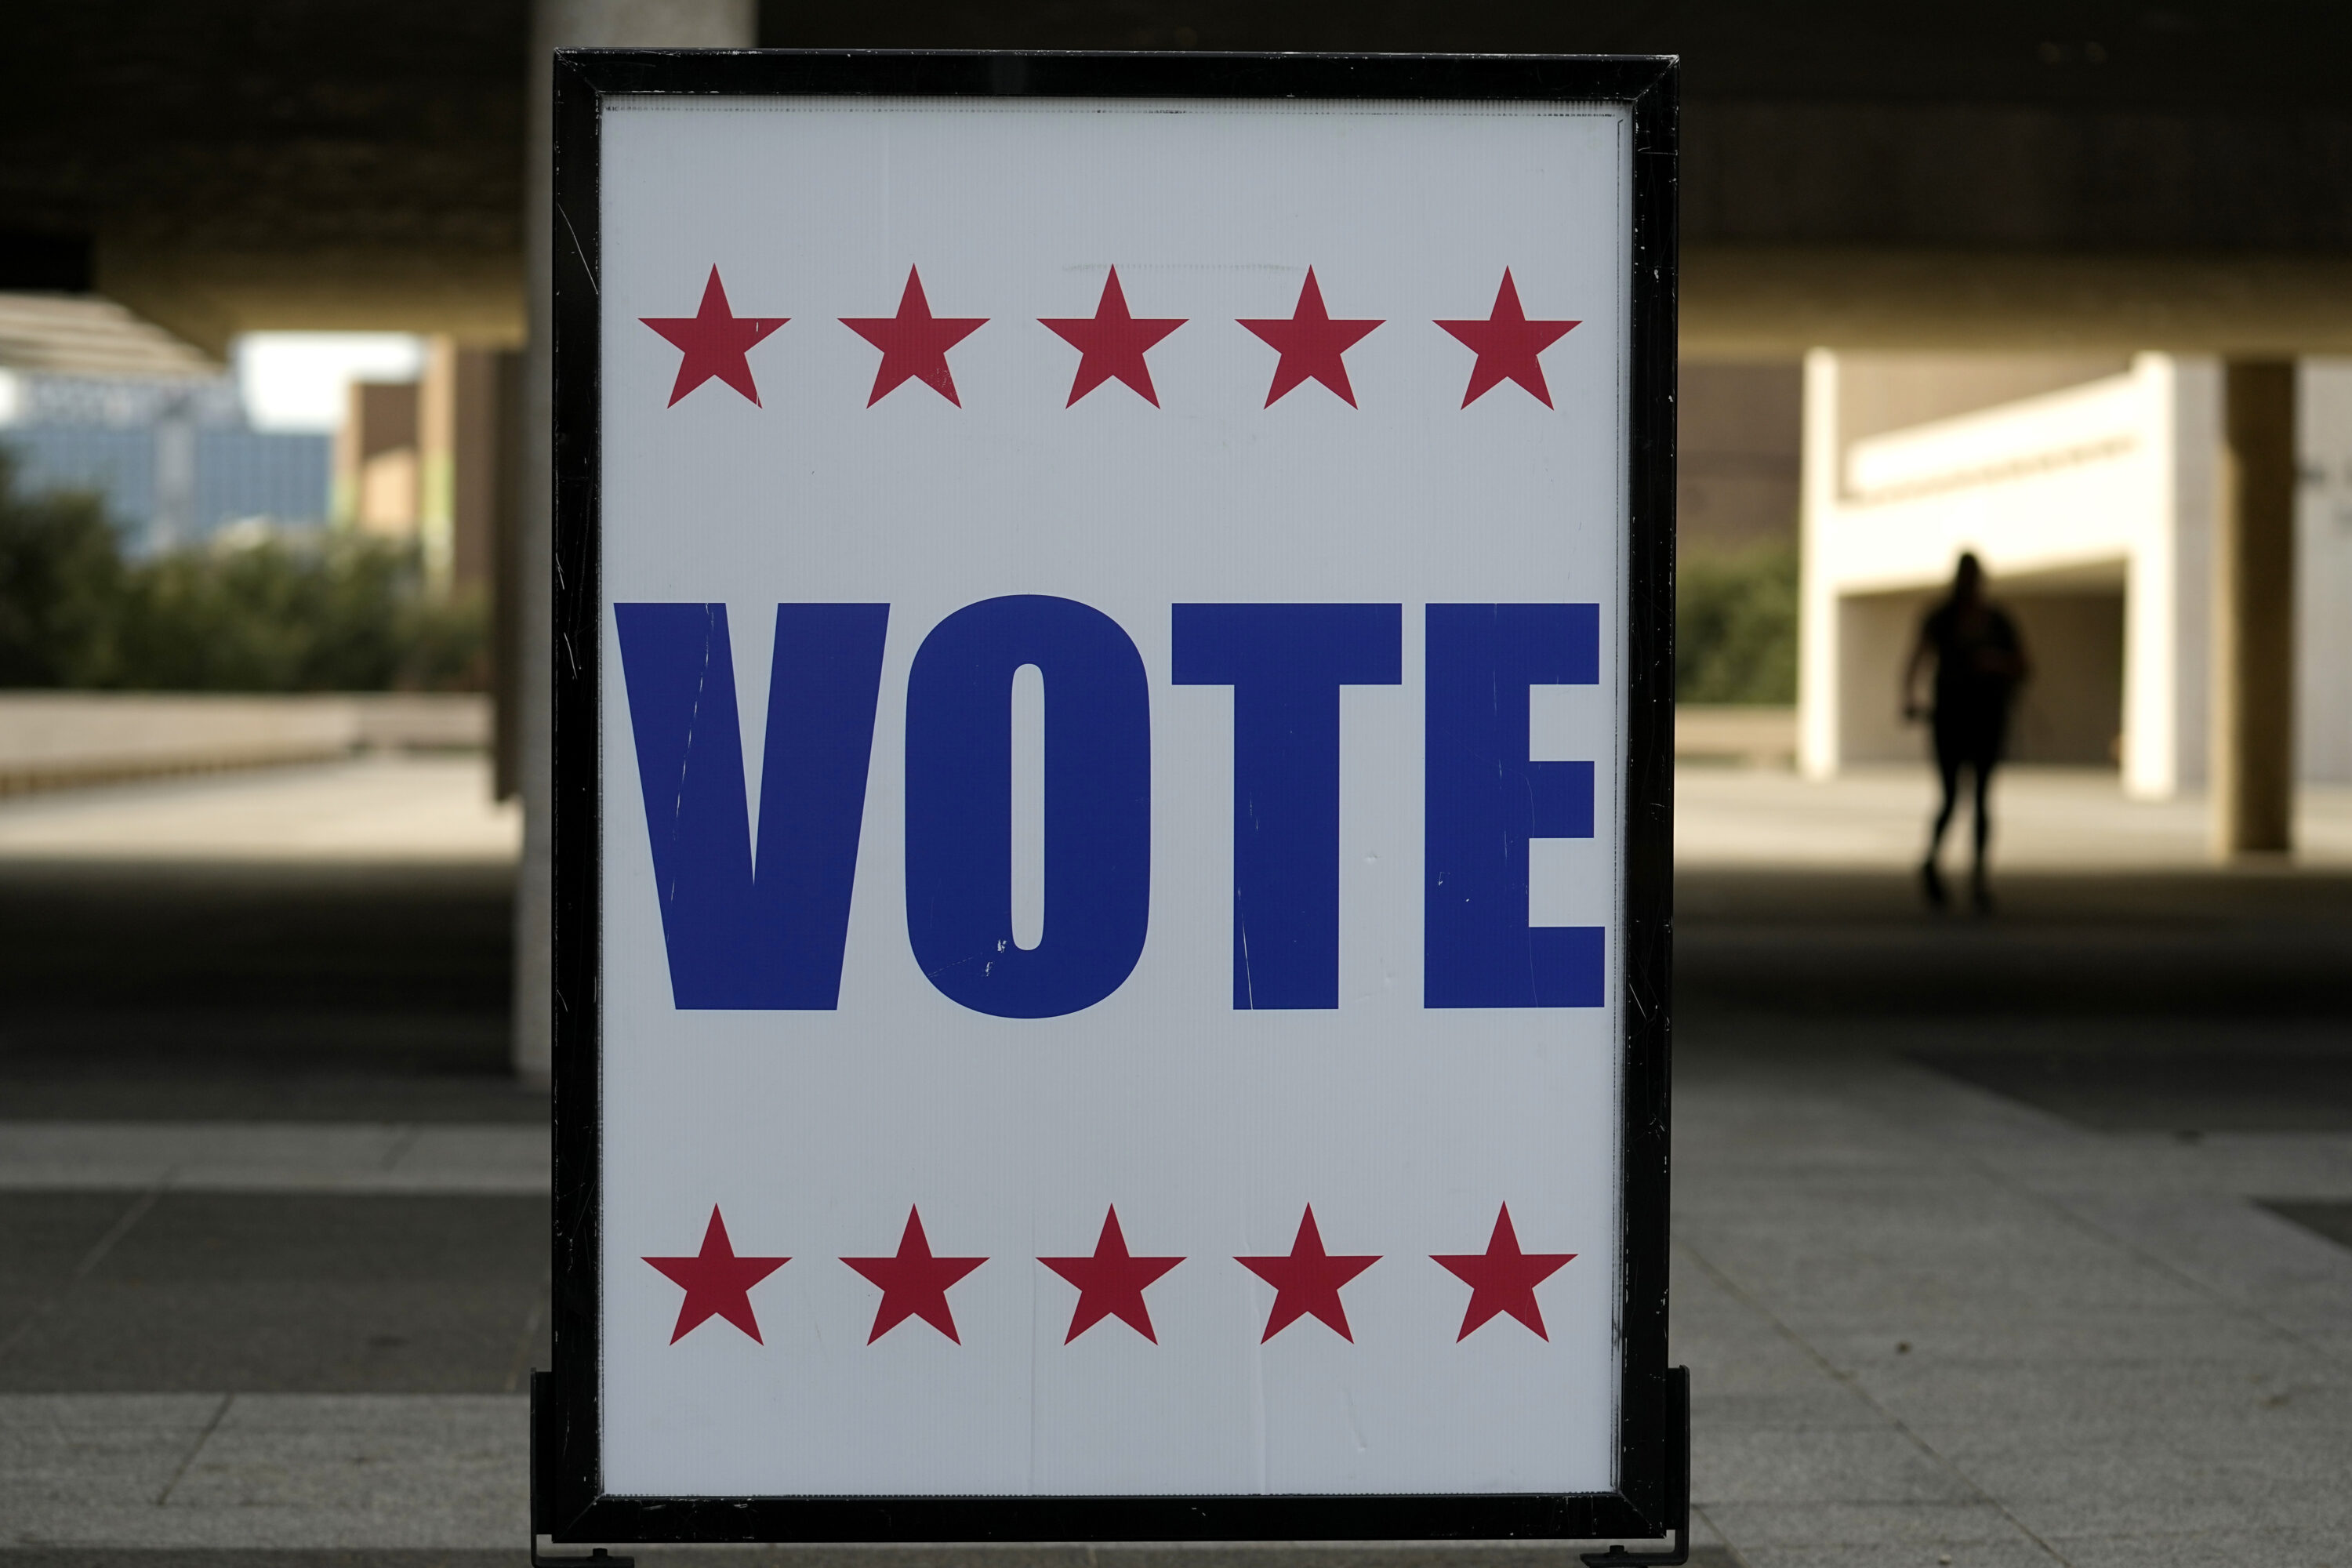 Addressing low voter turnout in Texas